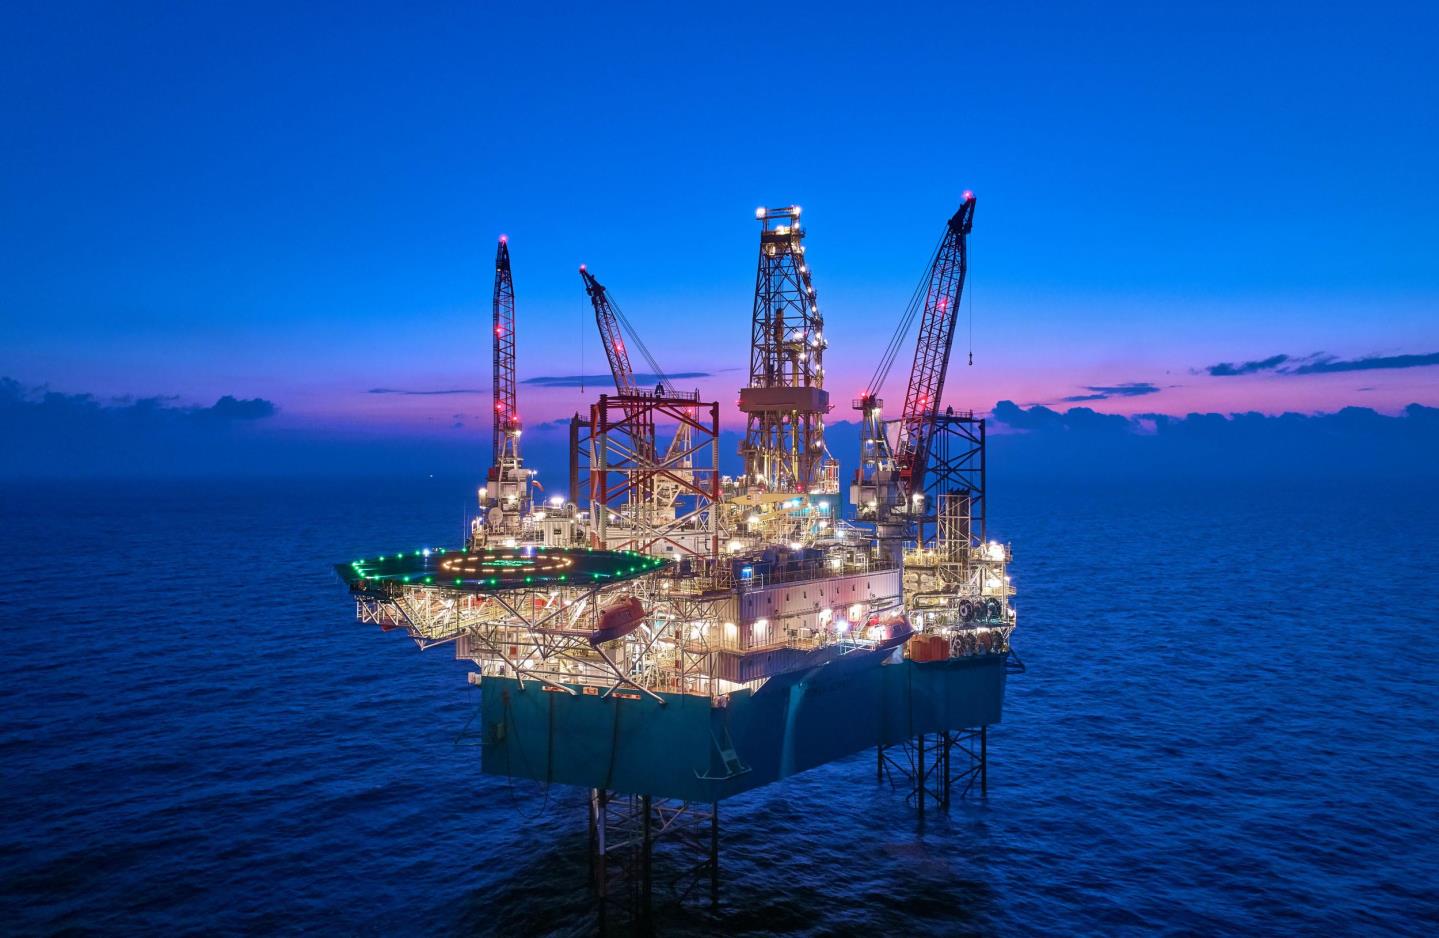 Still the wells to watch? A half-year look at North Sea exploration